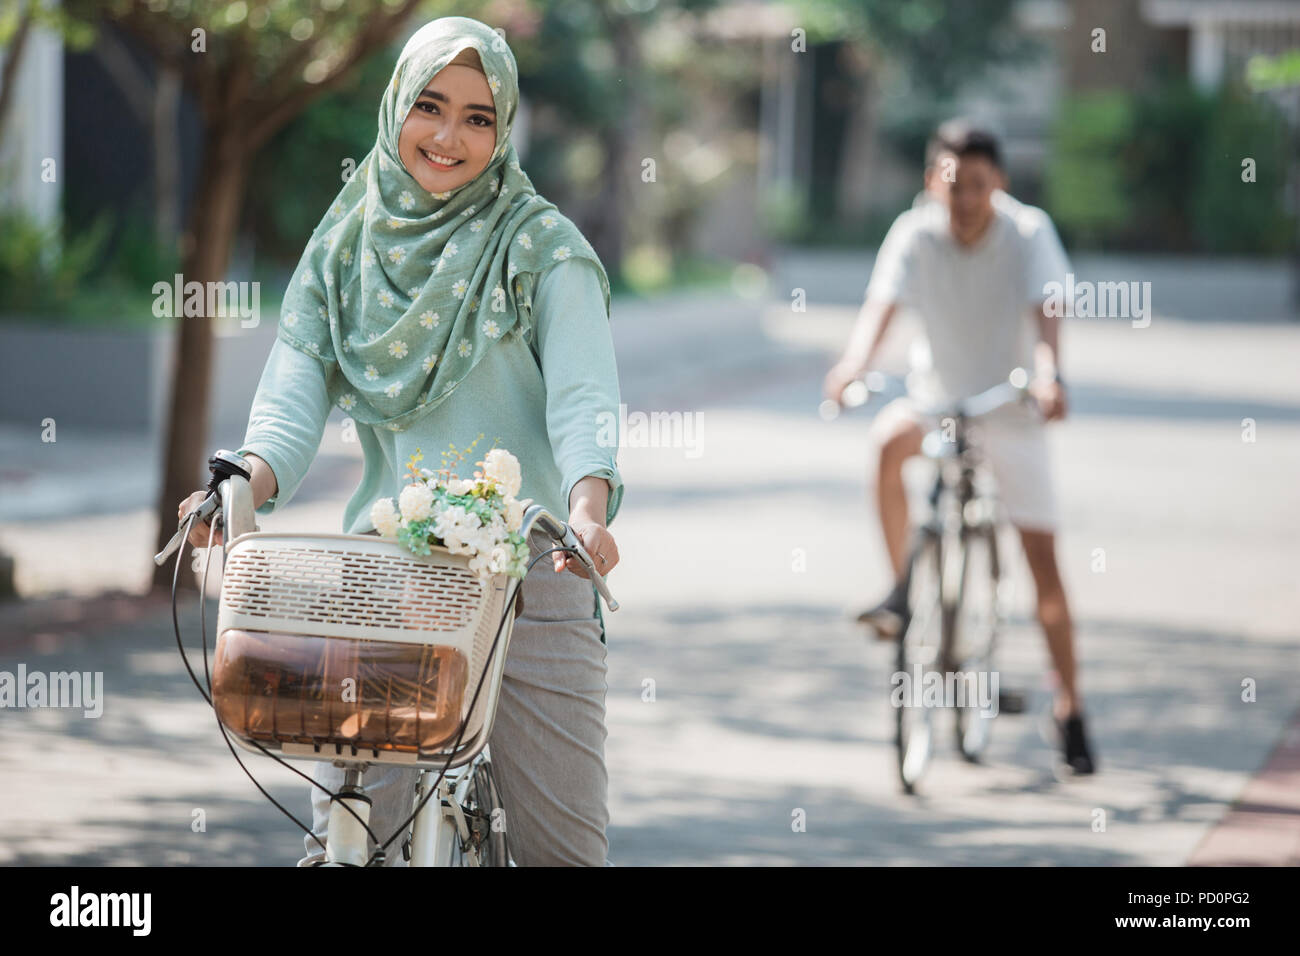 muslim woman riding a bicycle Stock Photo